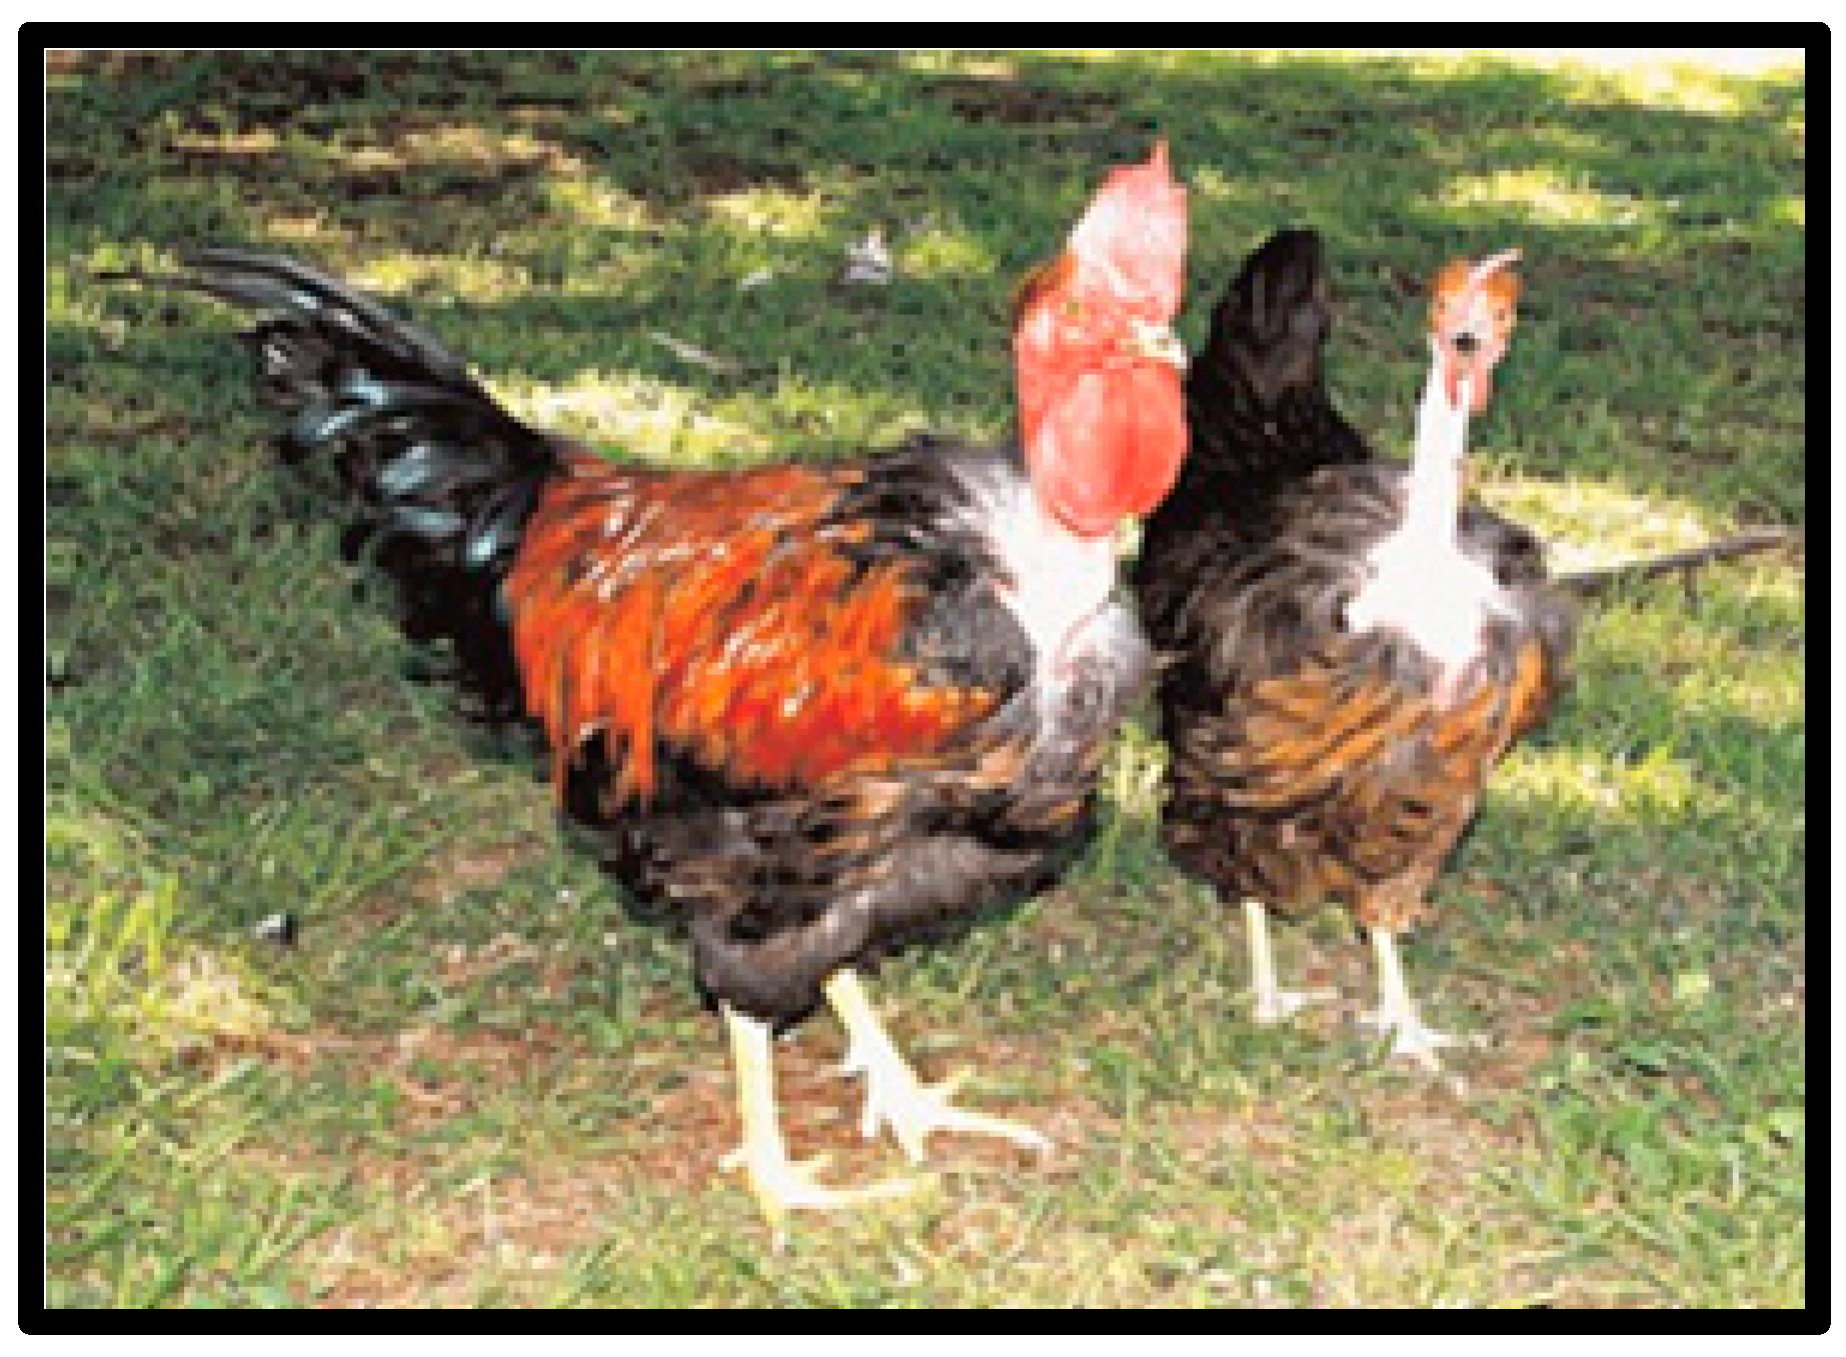 V. Best Practices for Keeping Hens to Minimize Negative Impact